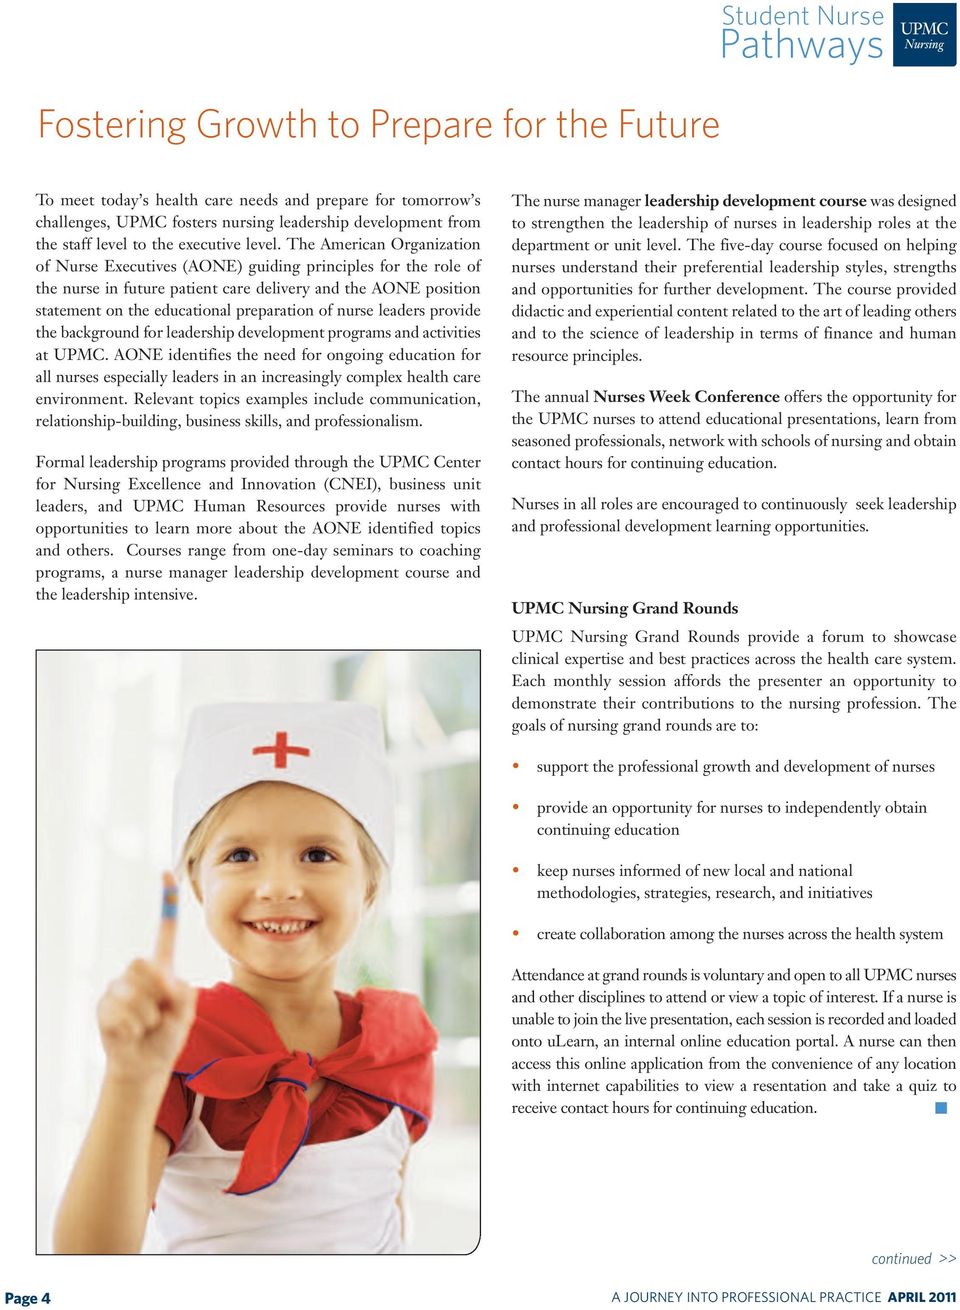 The American Organization of Nurse Executives (AONE) guiding principles for the role of the nurse in future patient care delivery and the AONE position statement on the educational preparation of